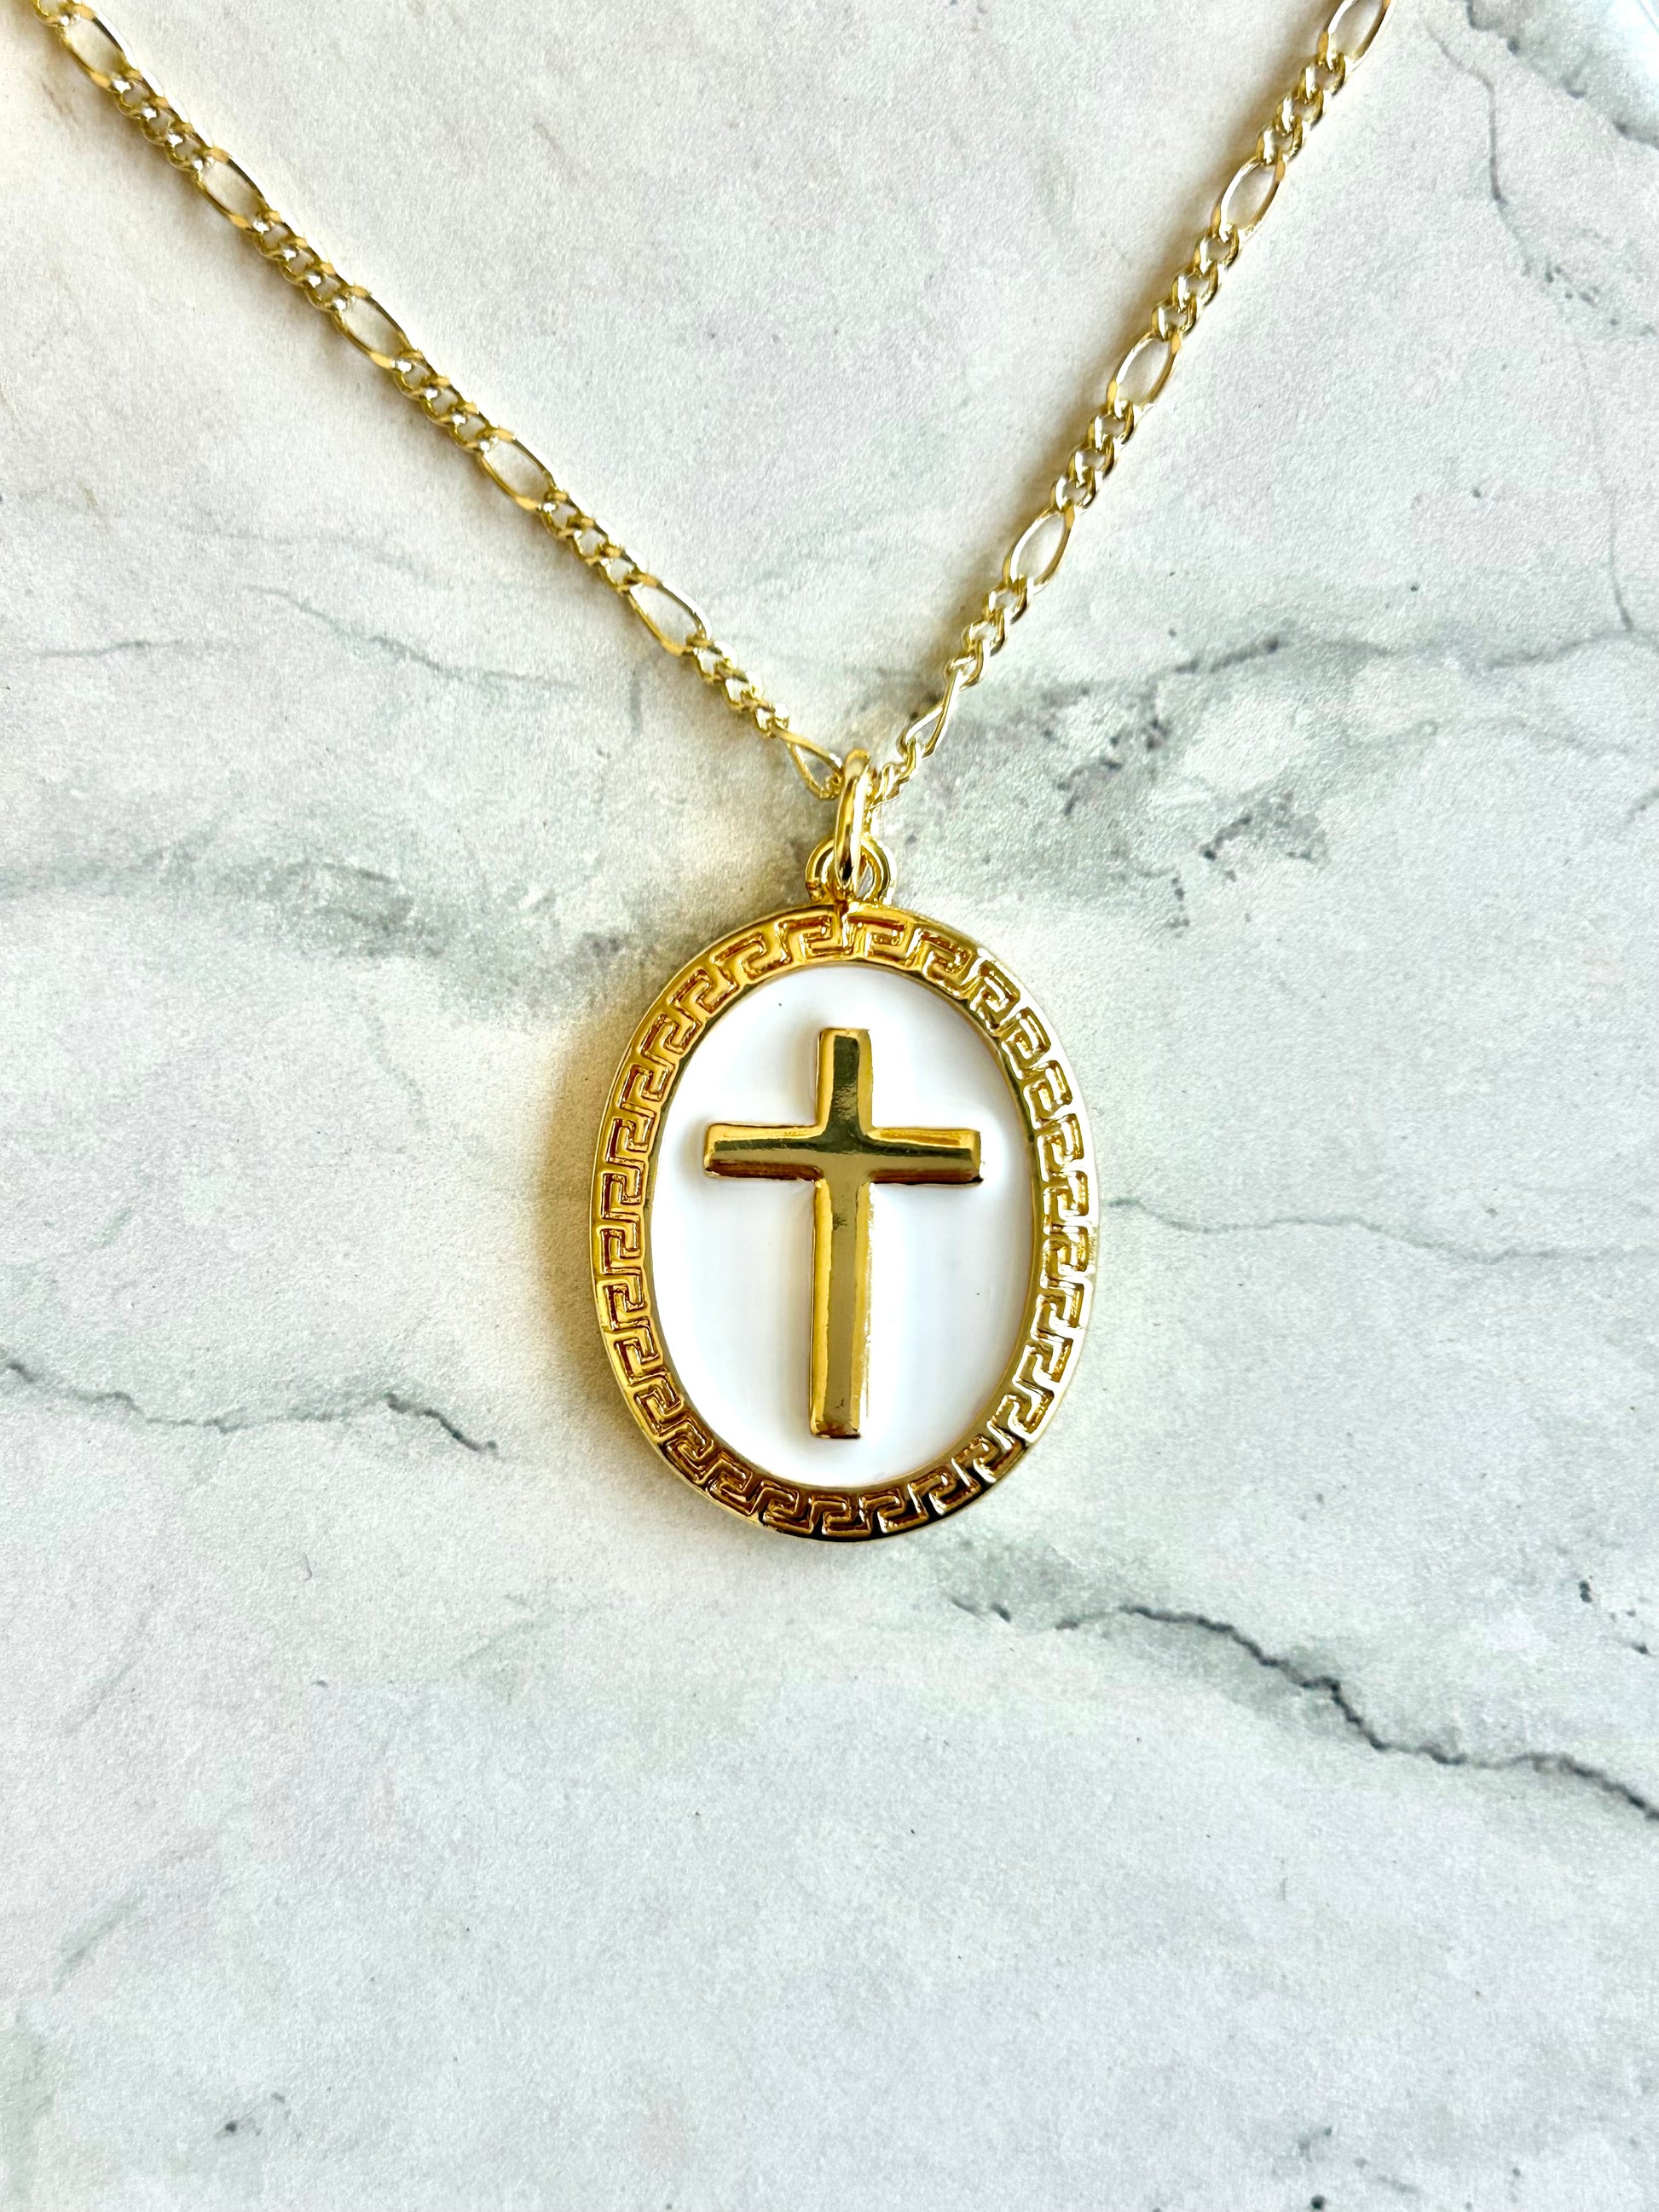 Gold Oval Cross Pendant Necklace, Catholic Jewelry, Christian Jewelry, Gold Cross Necklace, dainty cross necklace, gold cross necklace, religious necklace, gold necklace, christian jewelry, catholic jewelry, christian gifts, catholic gifts, catholic gift for her, first communion gift, baptism gift, wedding gift, christian wedding, bridesmaid gift, catholic gift for her, confirmation gift